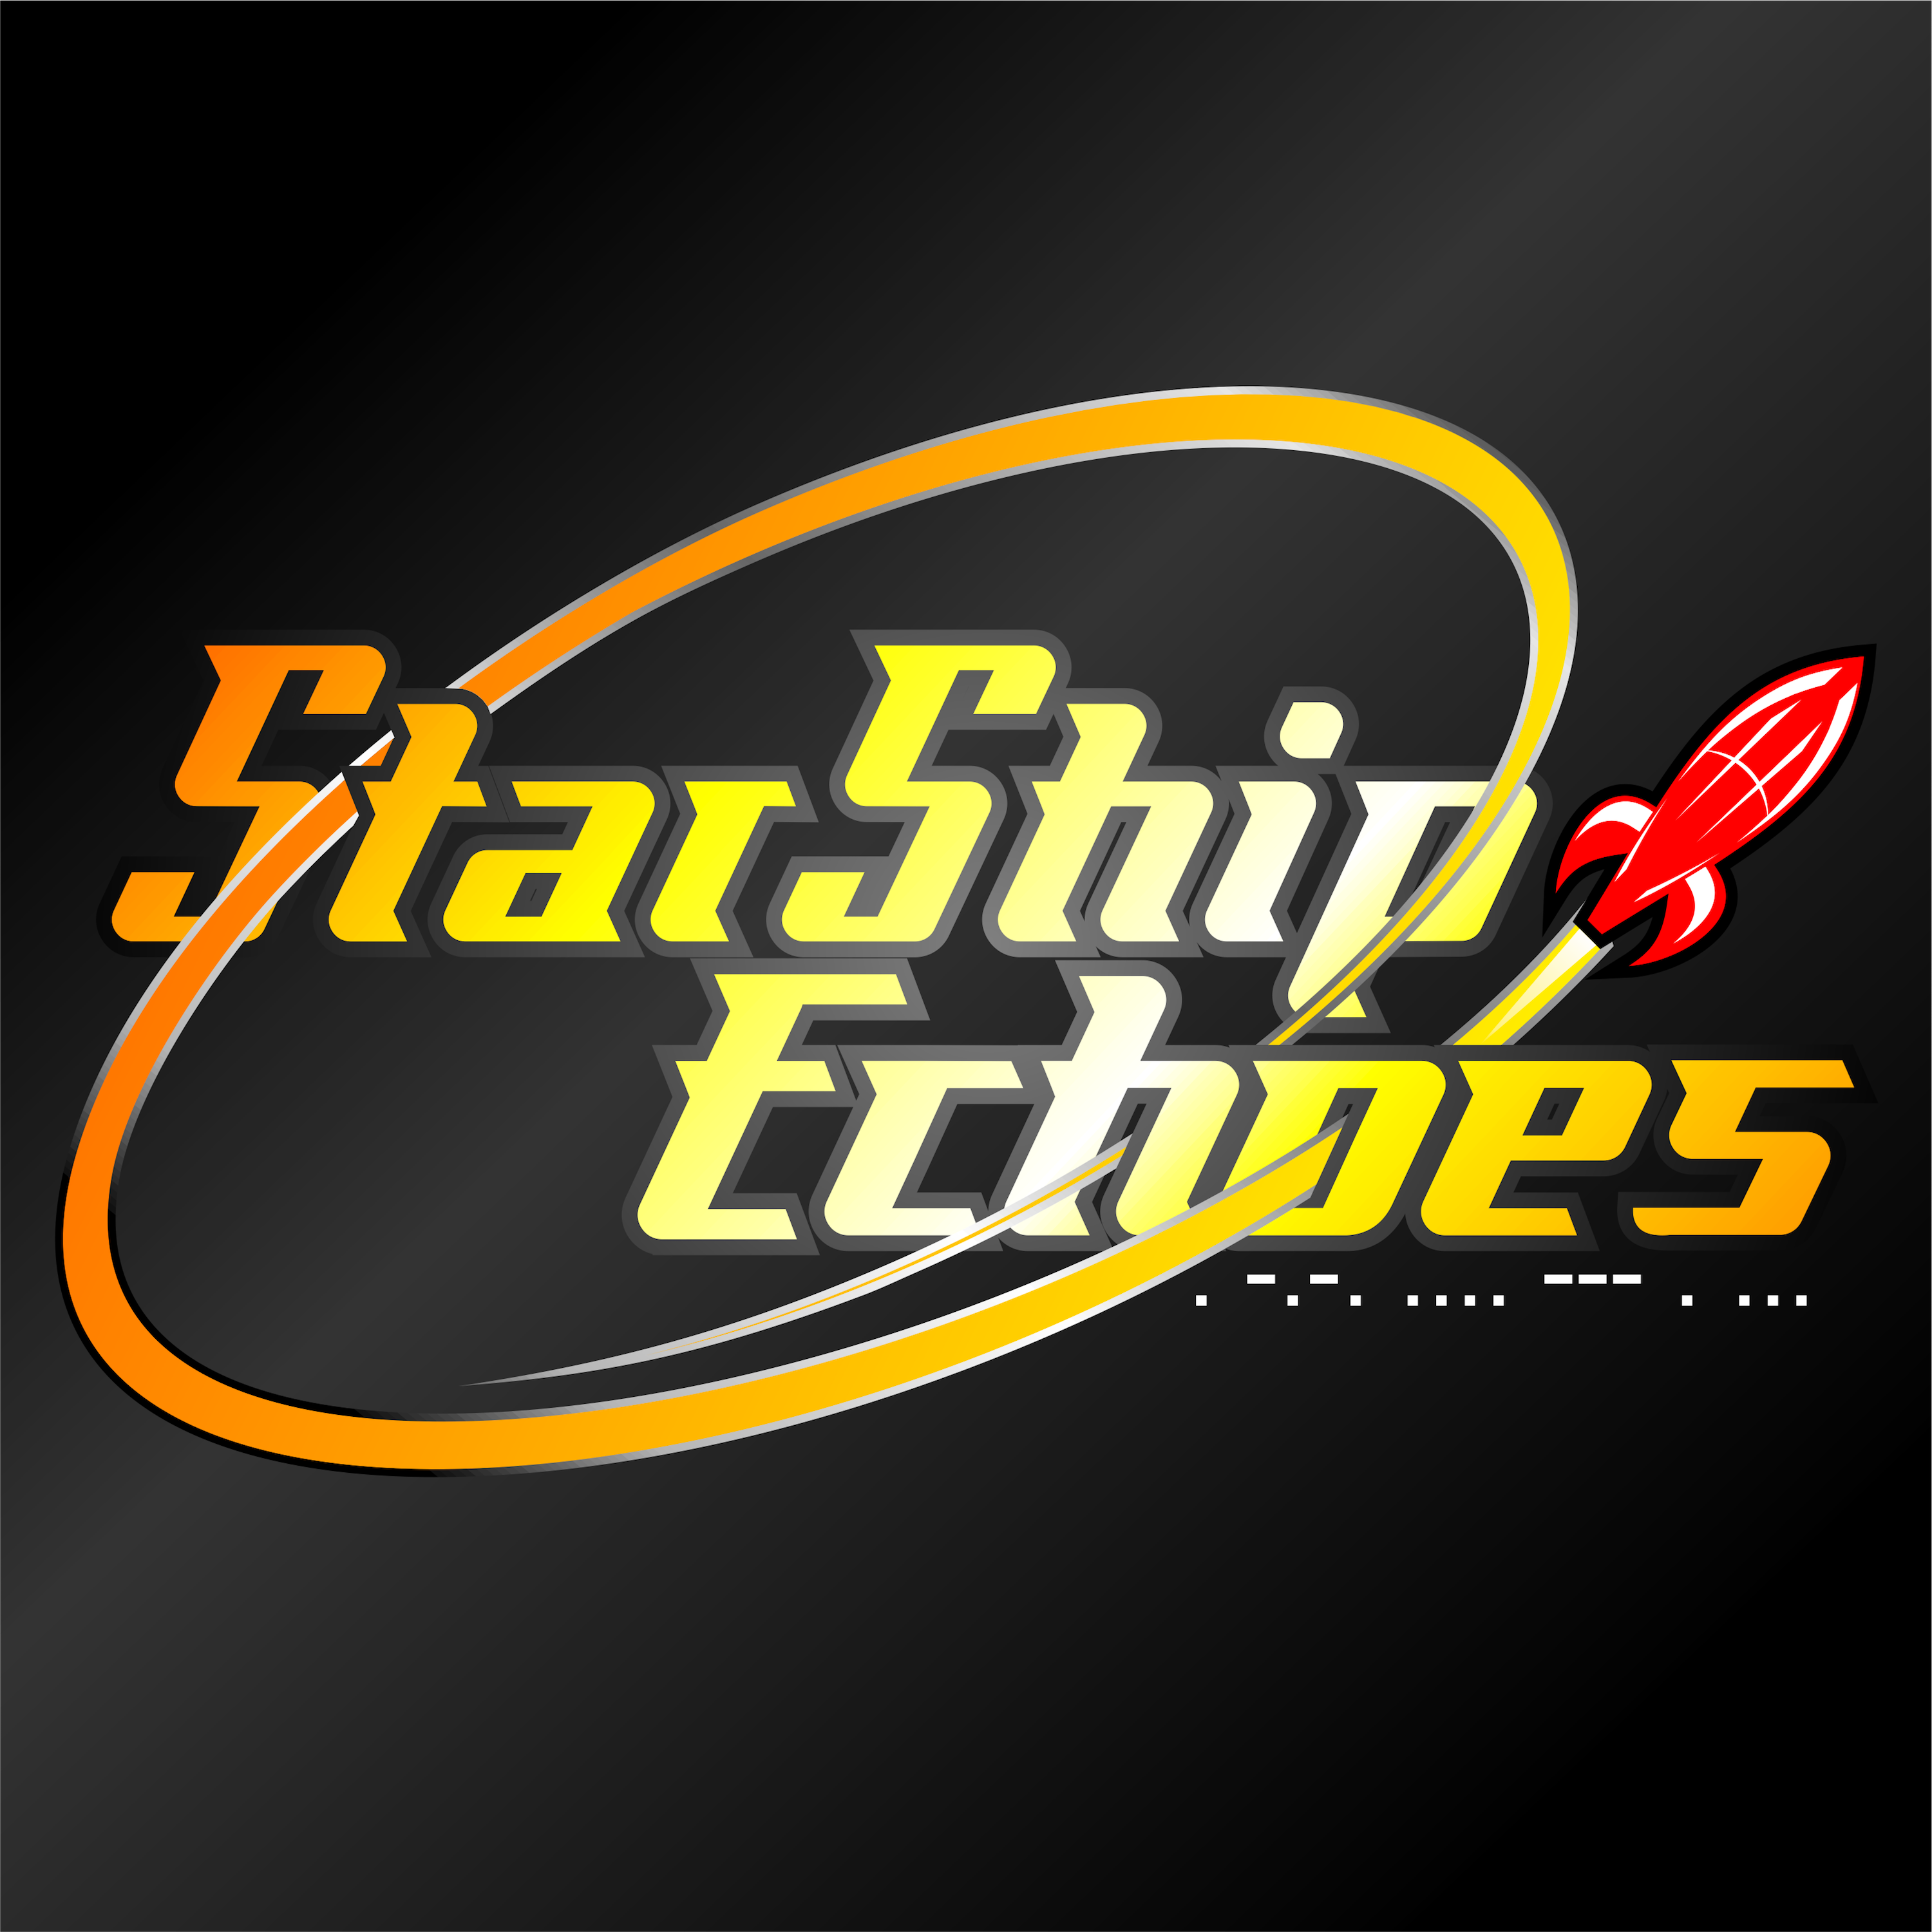 StarShipEchoes 21st April 2013 Interview Jerry Pournelle Greg Benford and Larry Niven